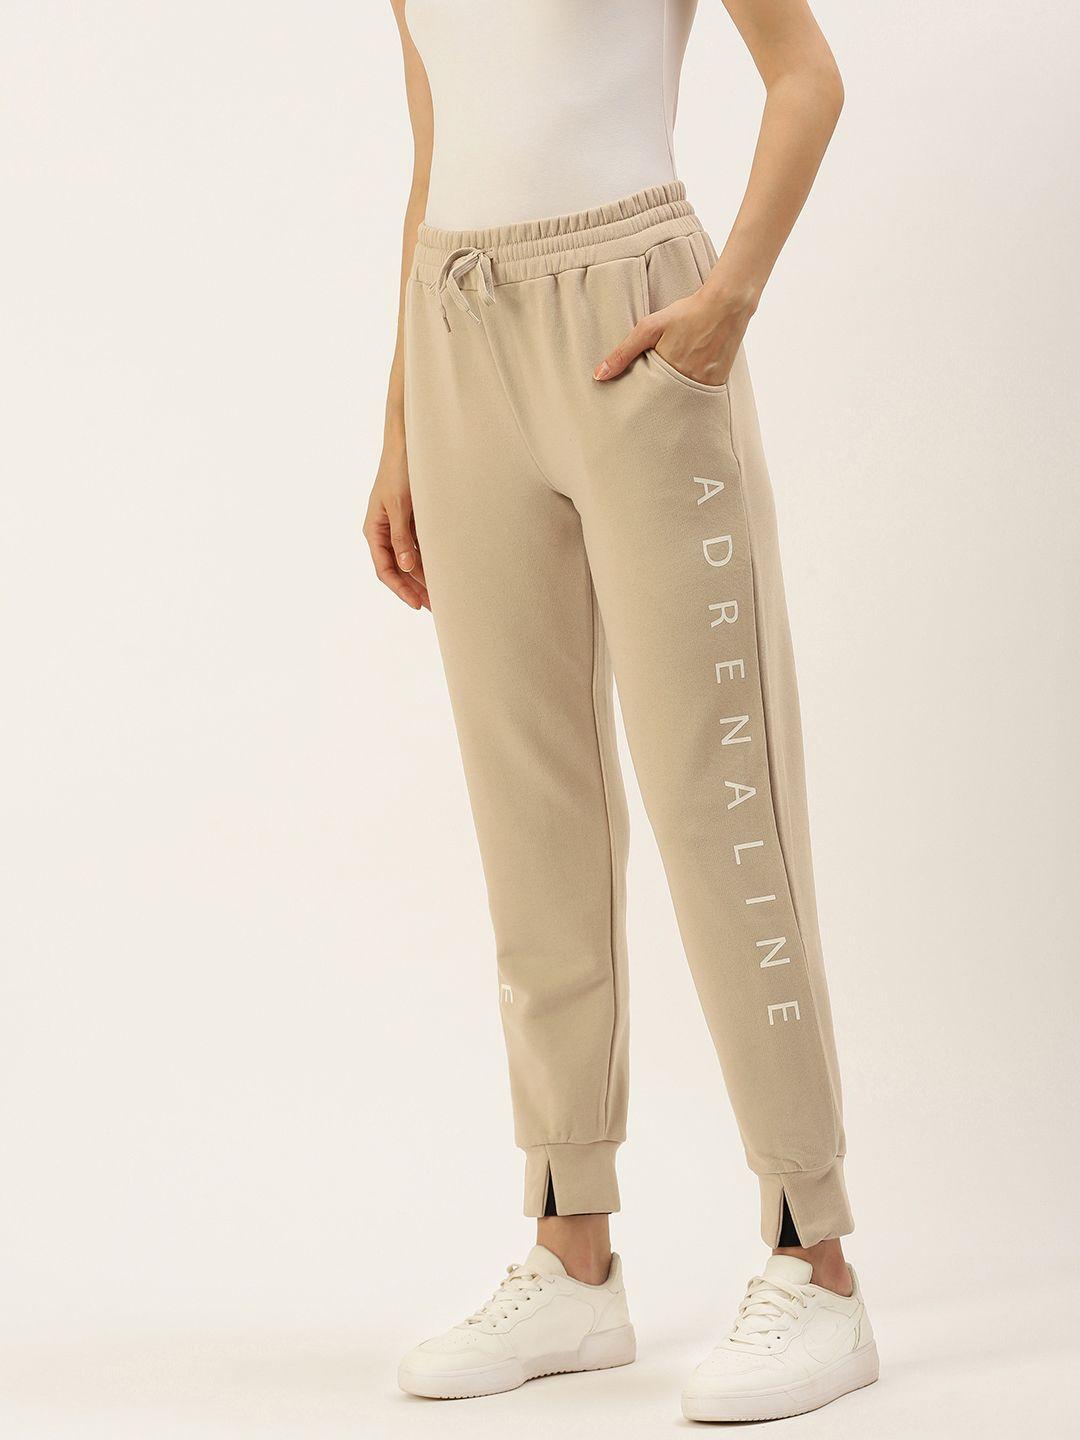 forever-21-women-beige-typography-printed-regular-fit-joggers